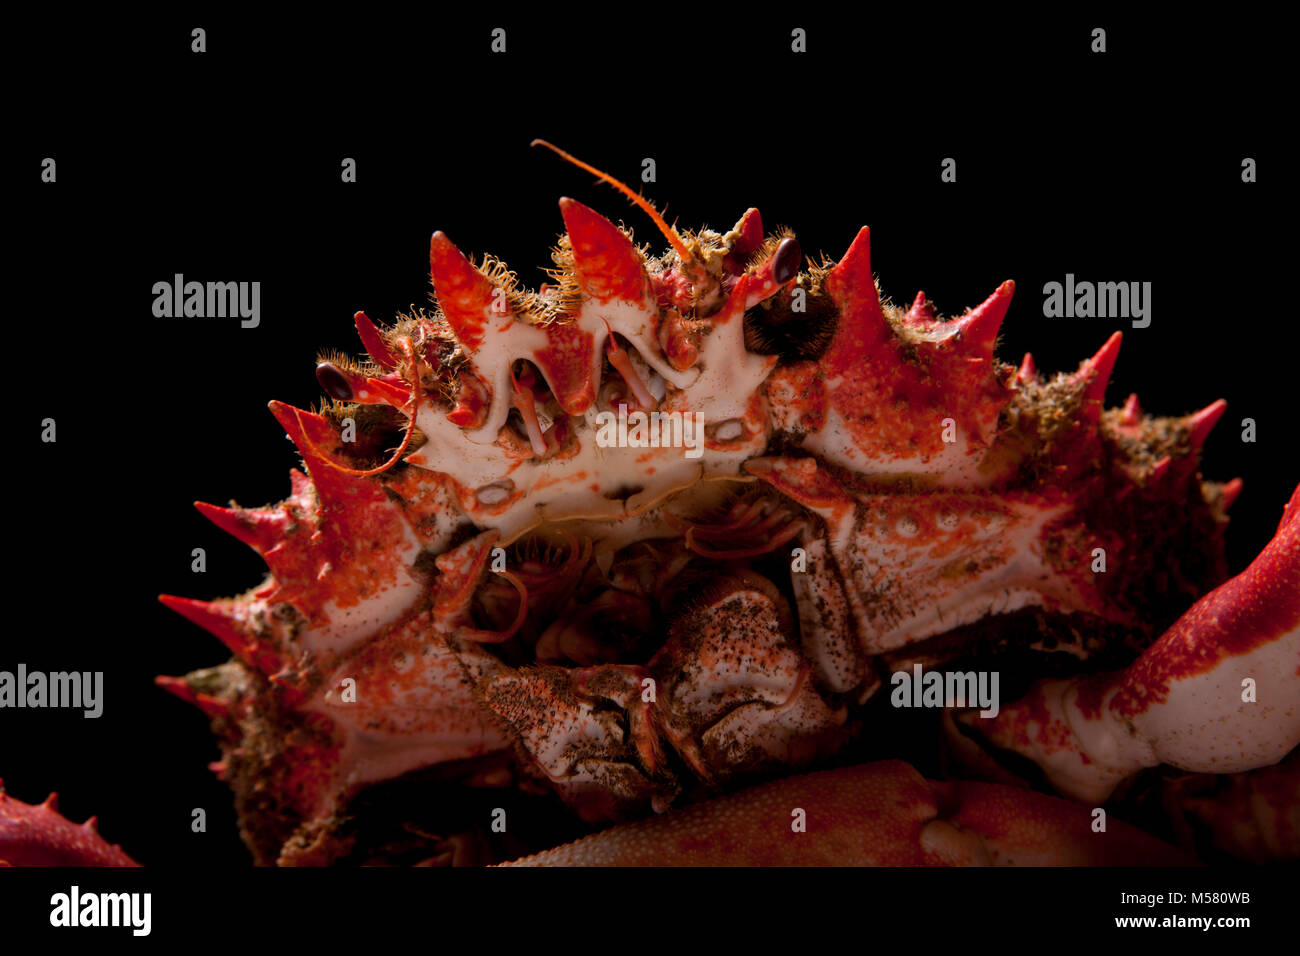 A cooked spider crab, Maja squinado, caught in a drop net, on a black background. Dorset England UK GB Stock Photo